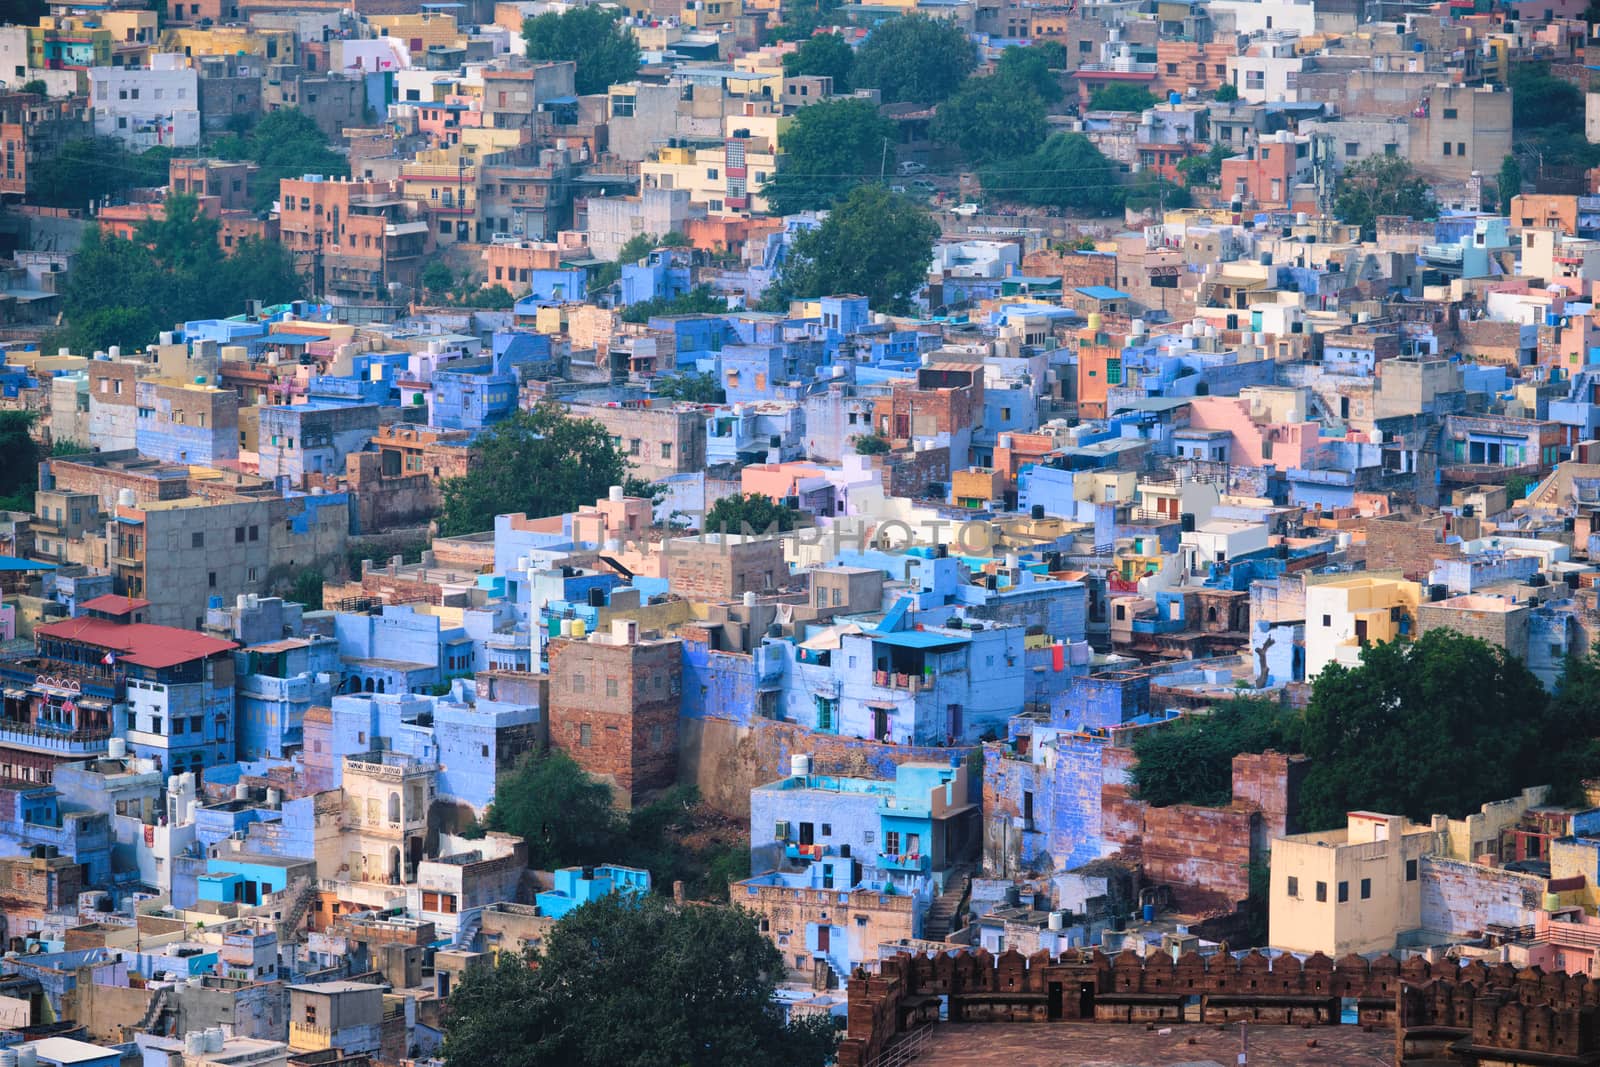 Aerial view of Jodhpur, also known as Blue City due to the vivid blue-painted Brahmin houses around Mehrangarh Fort. Jodphur, Rajasthan, India